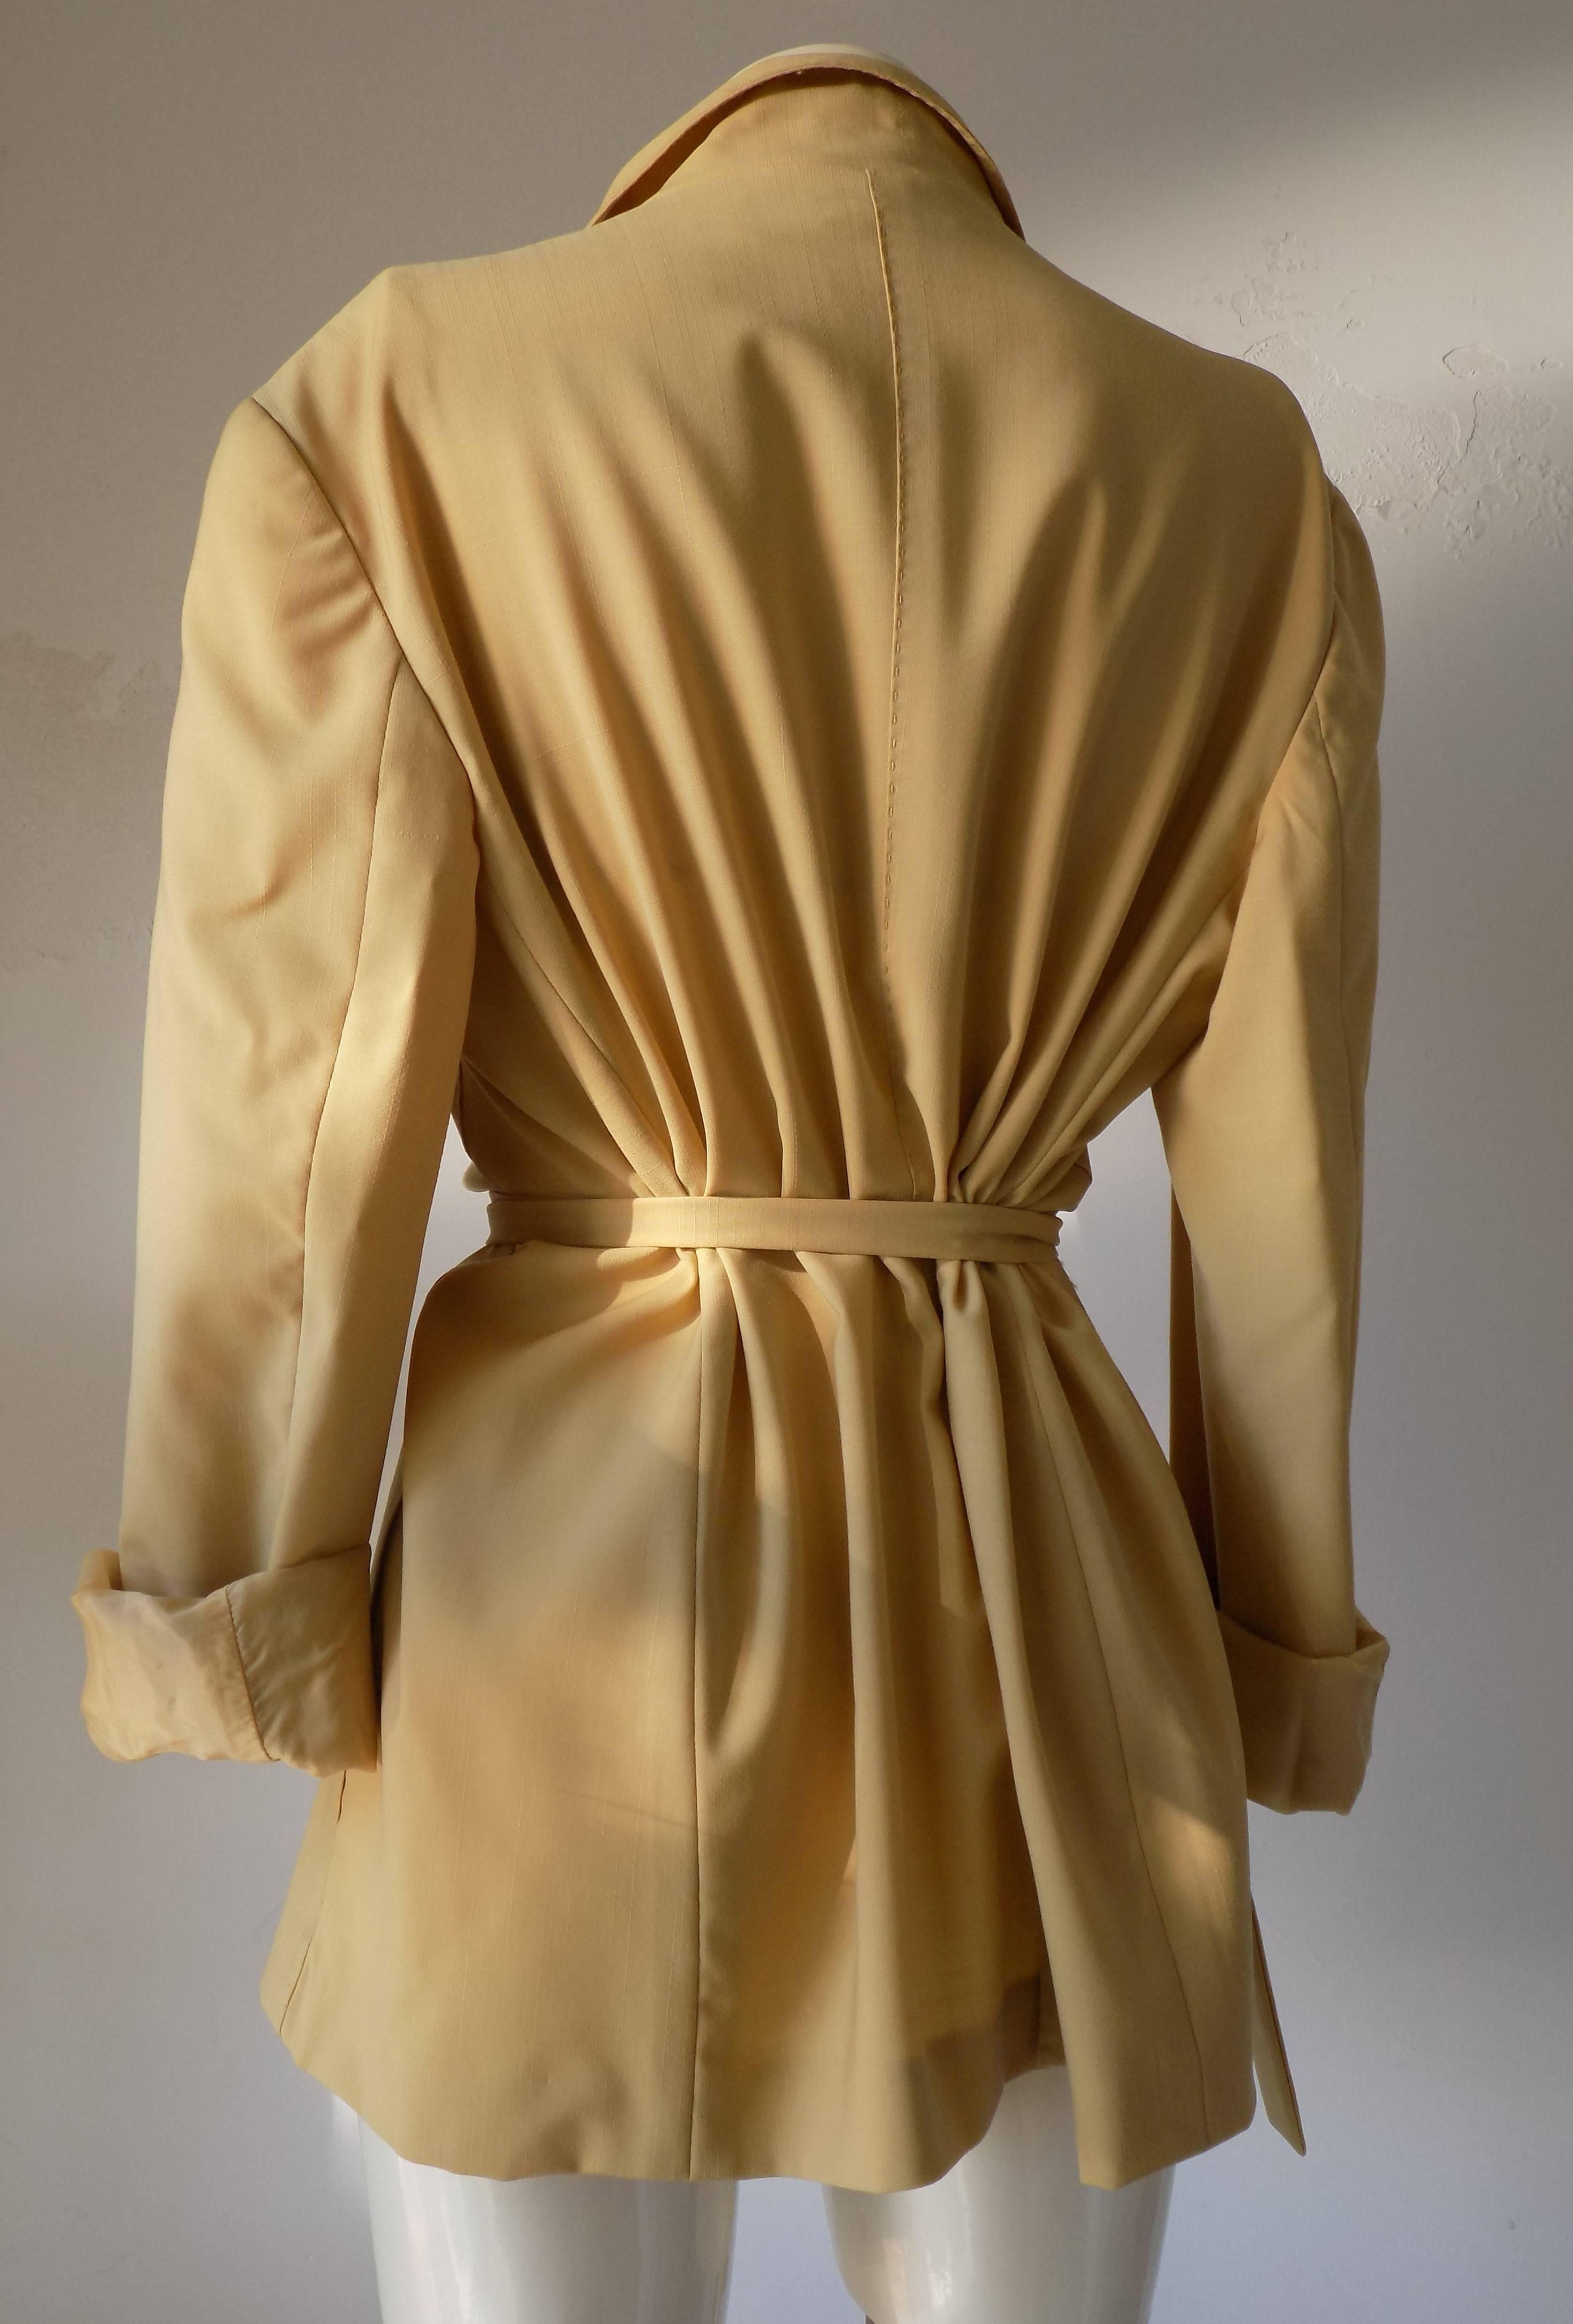 1980s Genny by Gianni Versace light brown wool jacket In New Condition For Sale In Capri, IT